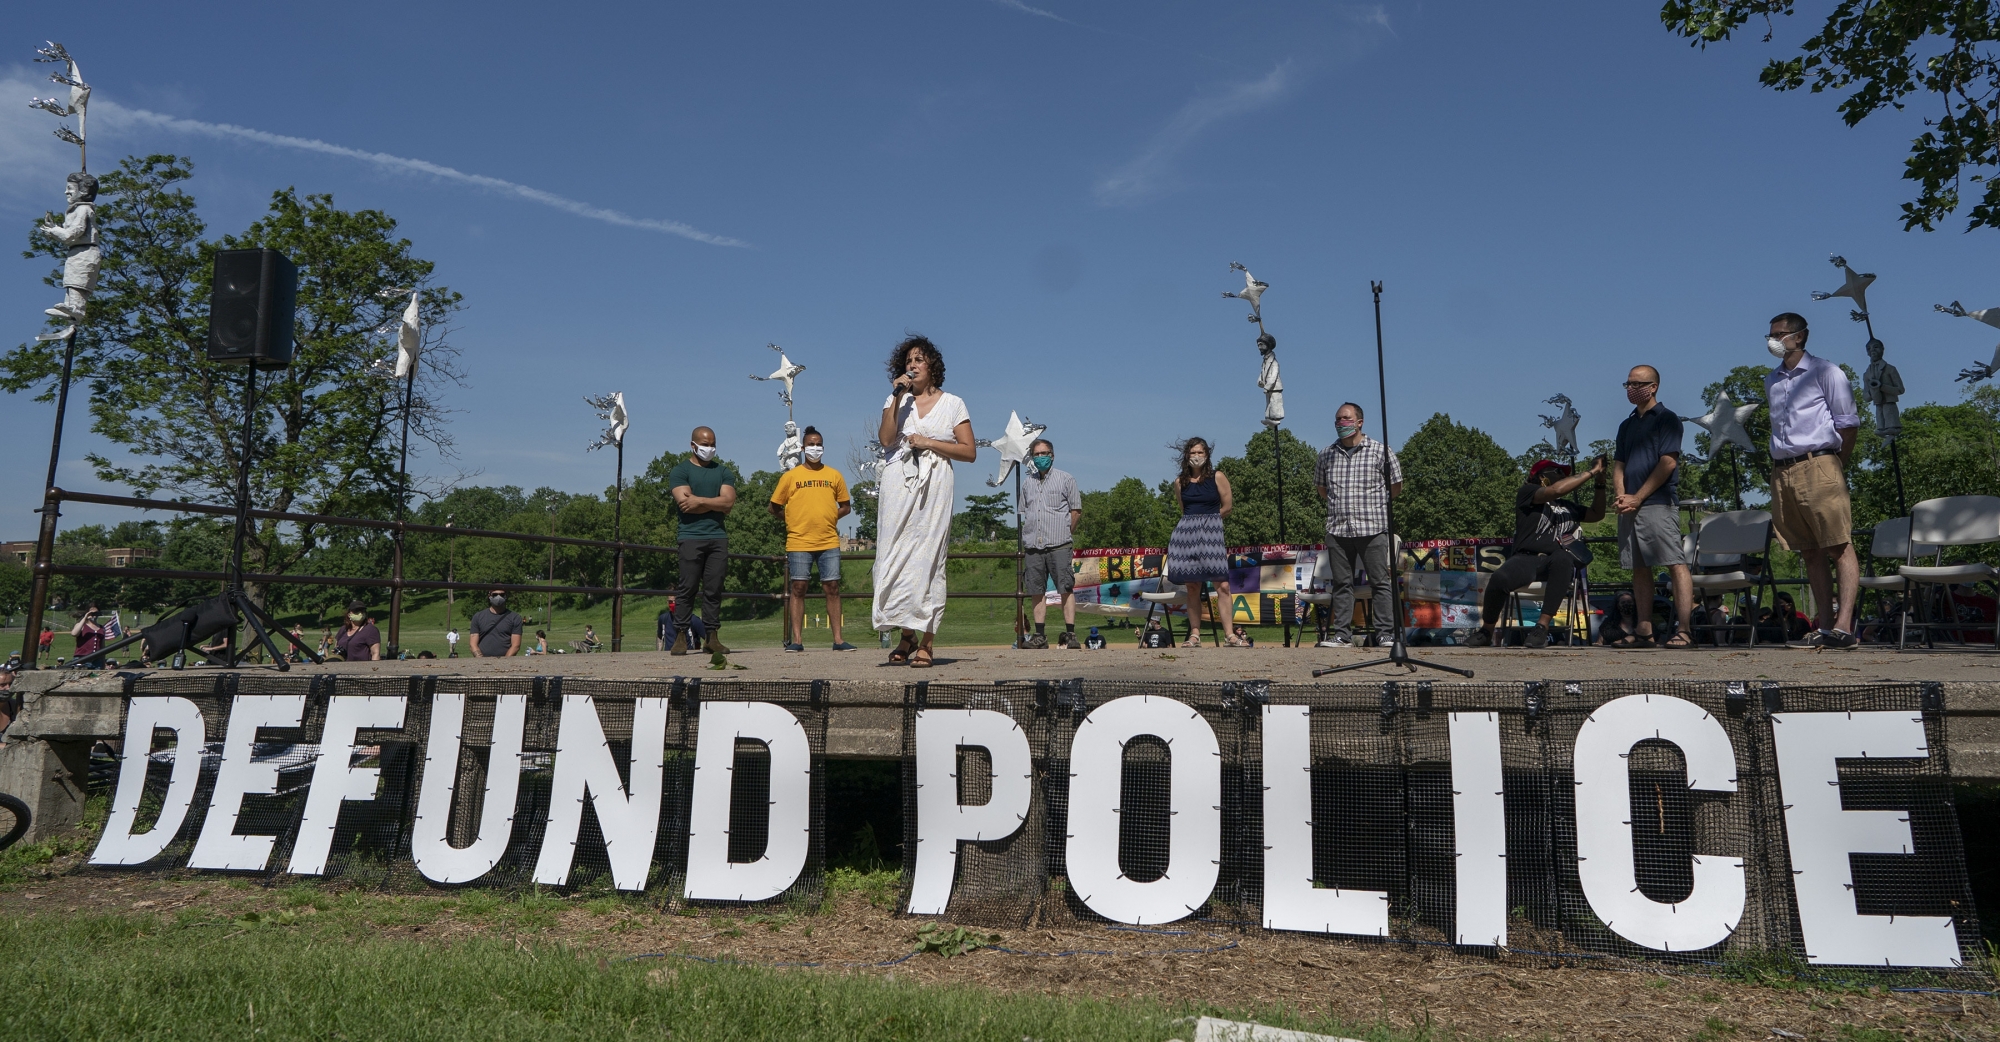 Alondra Cano, a City Council member, speaks during "The Path Forward" meeting at Powderhorn Park on Sunday, June 7, 2020, in Minneapolis. The focus of the meeting was the defunding of the Minneapolis Police Department. (Jerry Holt/Star Tribune via AP)
ArcInfo